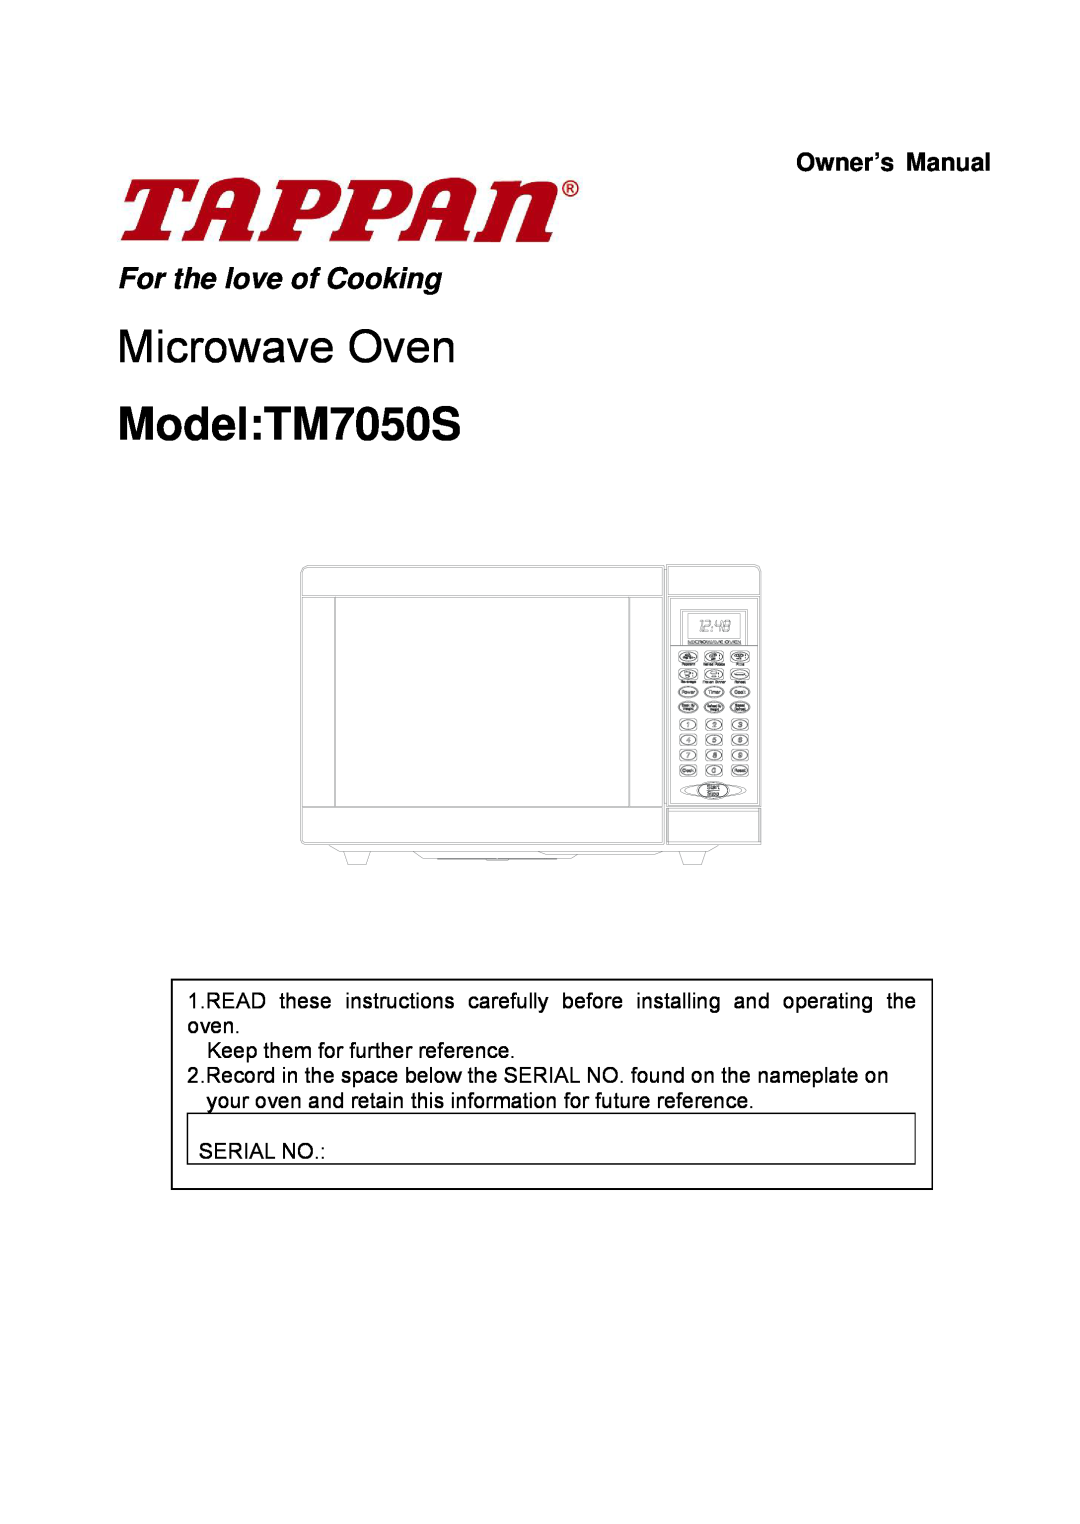 Tappan owner manual Microwave Oven, Model TM7050S, For the love of Cooking 